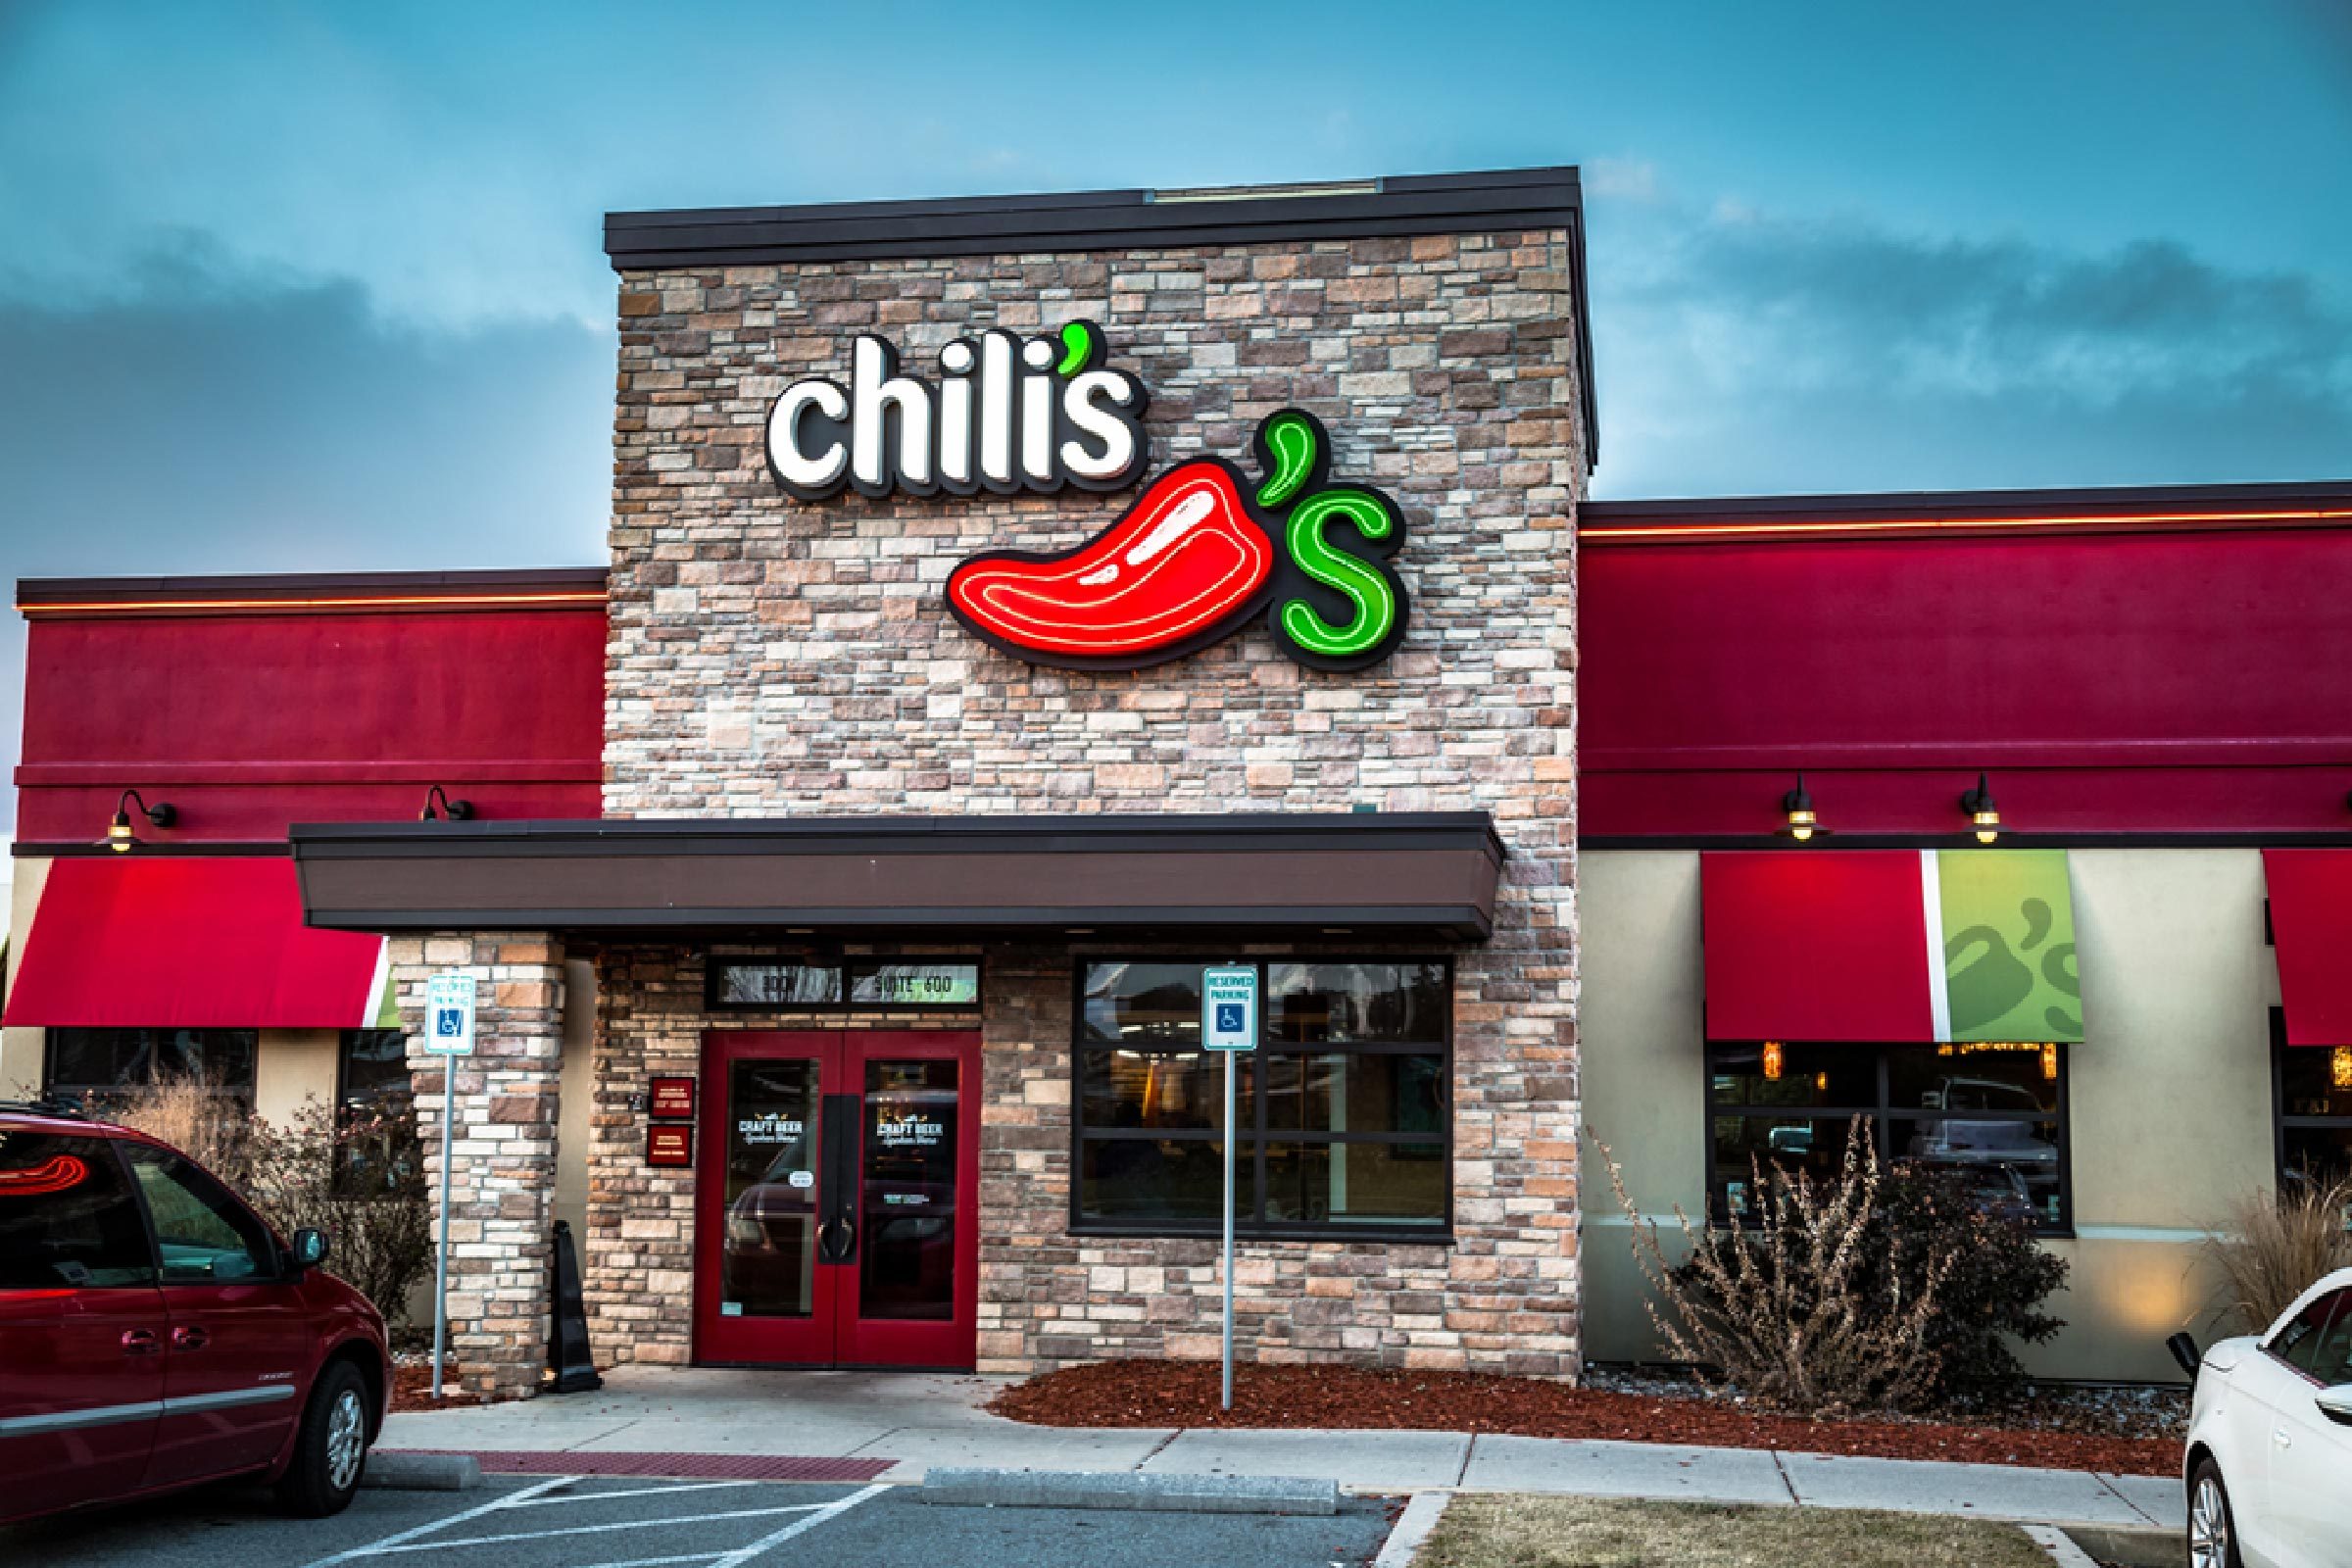 York, PA - December 30, 2016: Chili's bar and grill is a casual restaurant that specializes in Mexican cuisine.